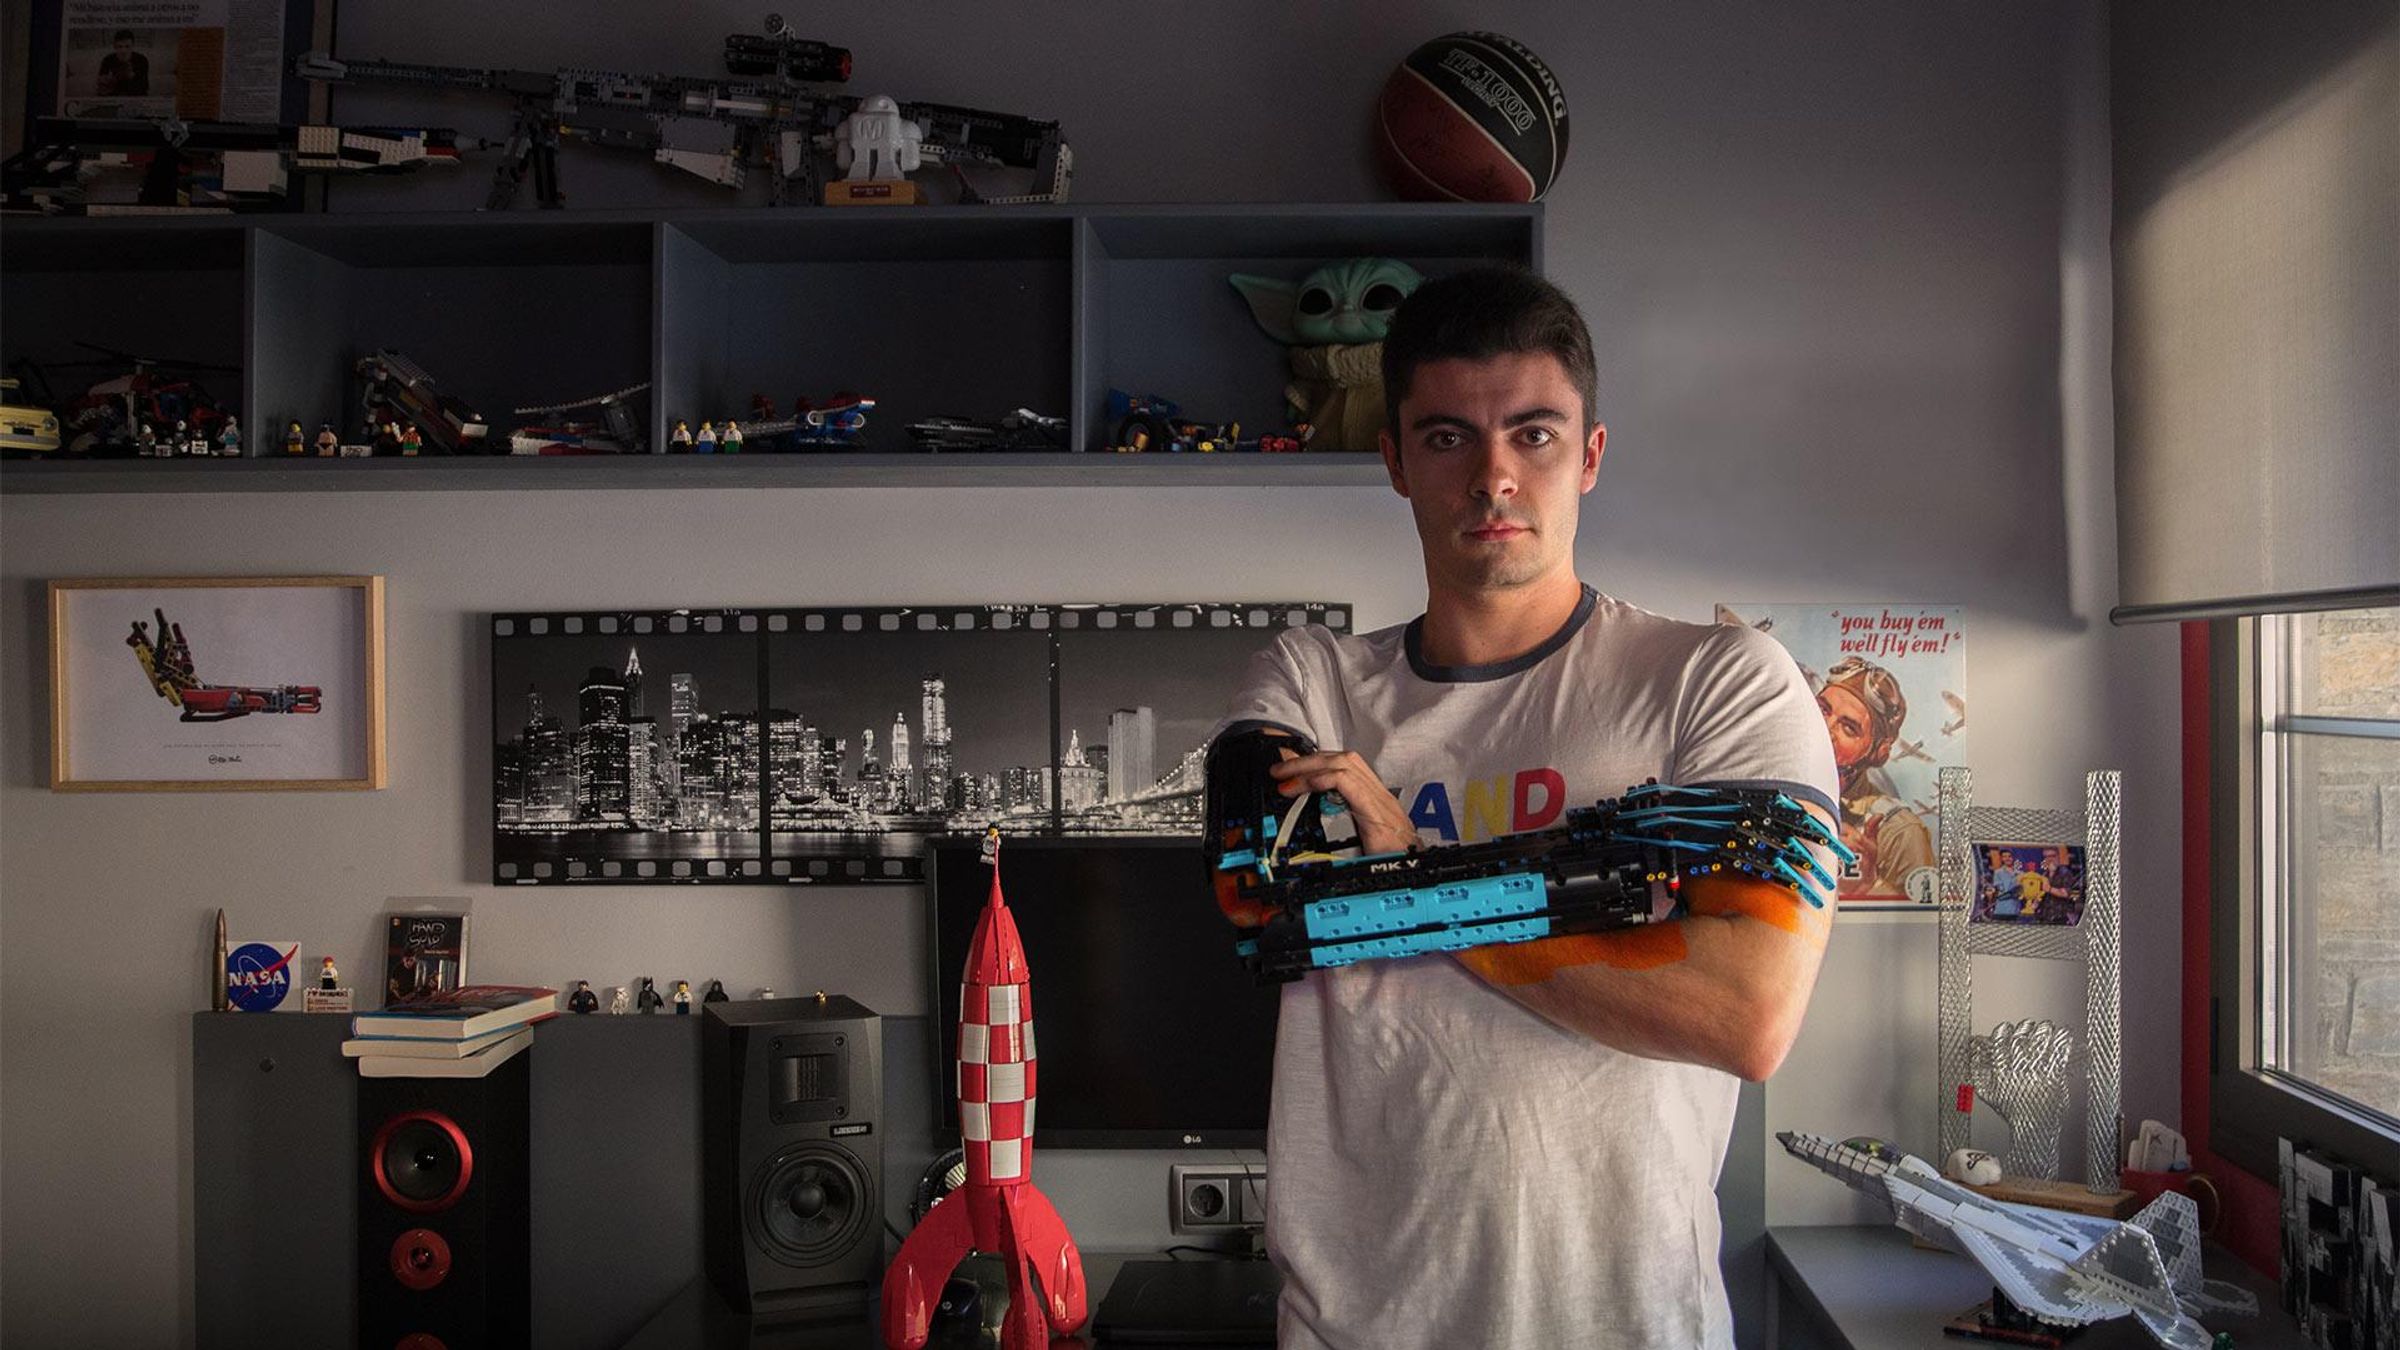 David Aguilar with his MK-2 prosthetic arm, Andorra